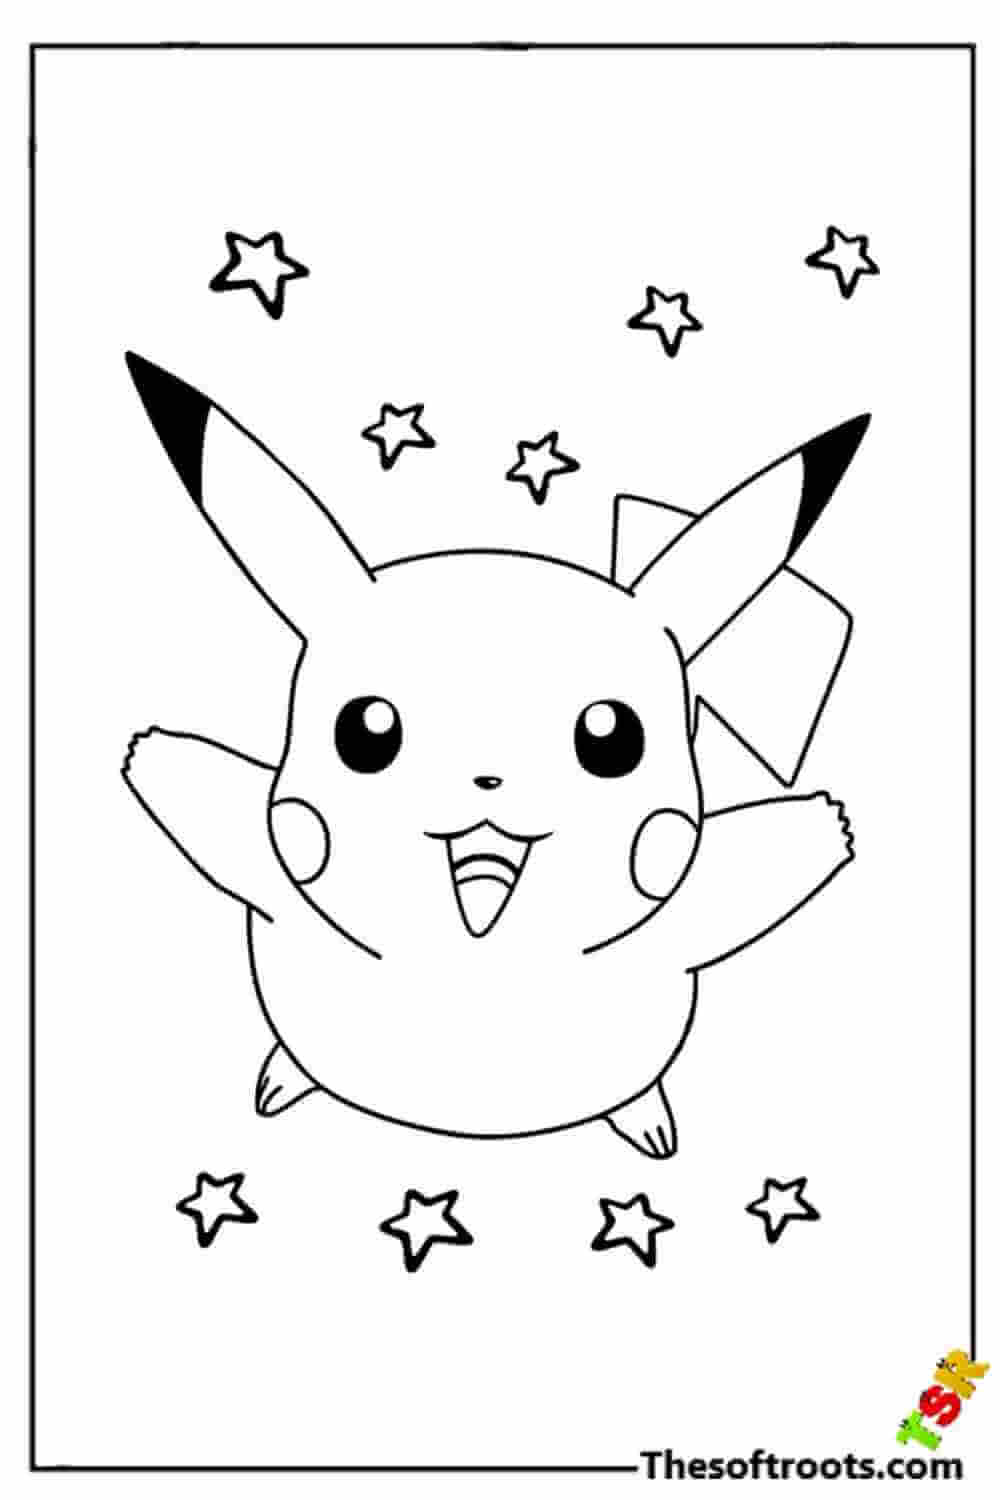 Pikachu in the stars coloring pages